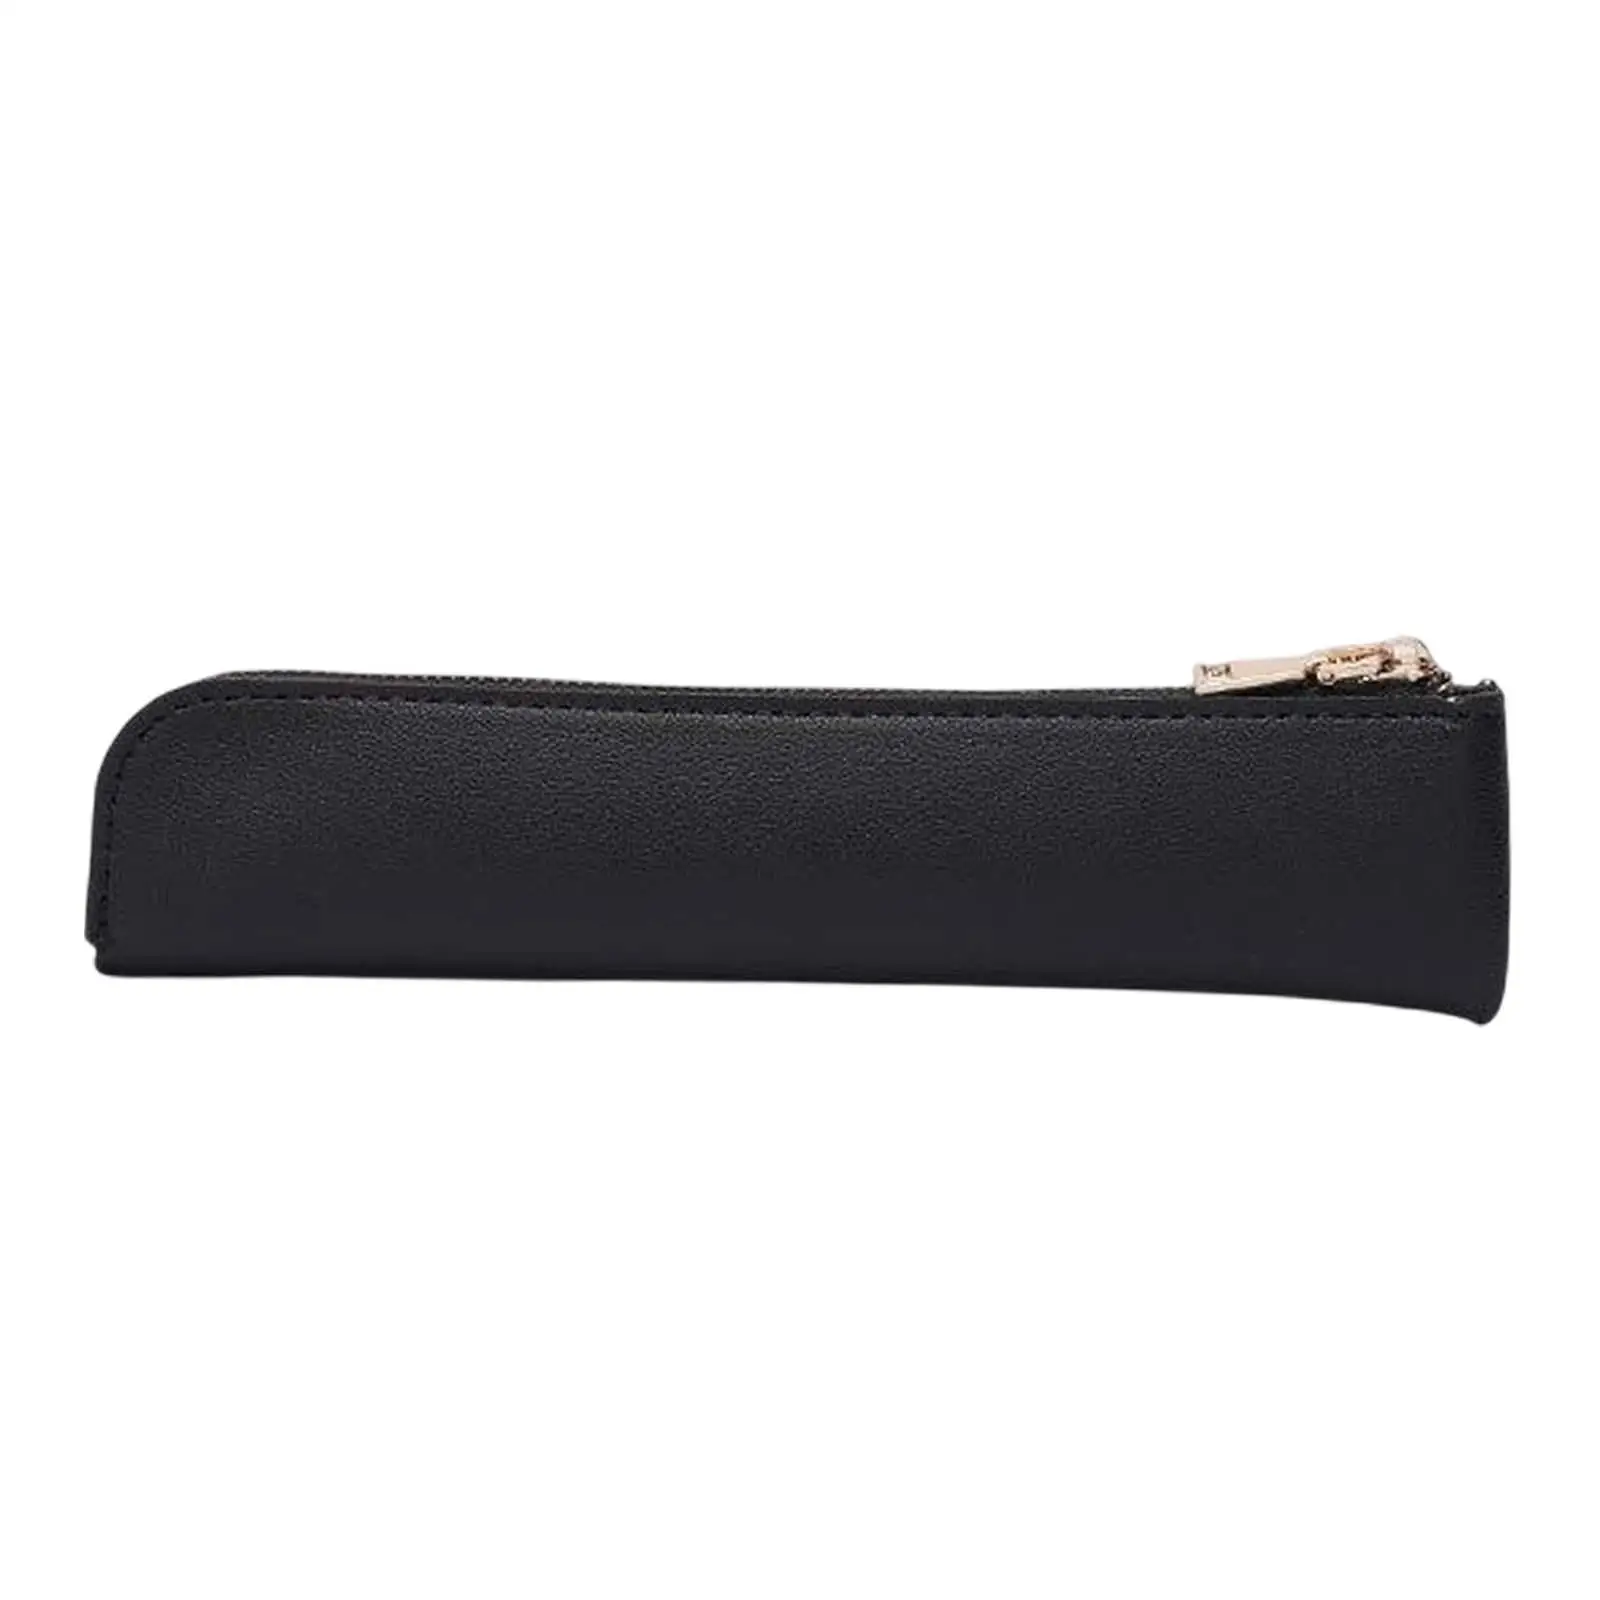 PU Cosmetic Pouch Accessory Bag Pen Holder Pencil Bag for Putting Around 3 to 4Pcs Fountain Pens Elegant Soft Water Resistant